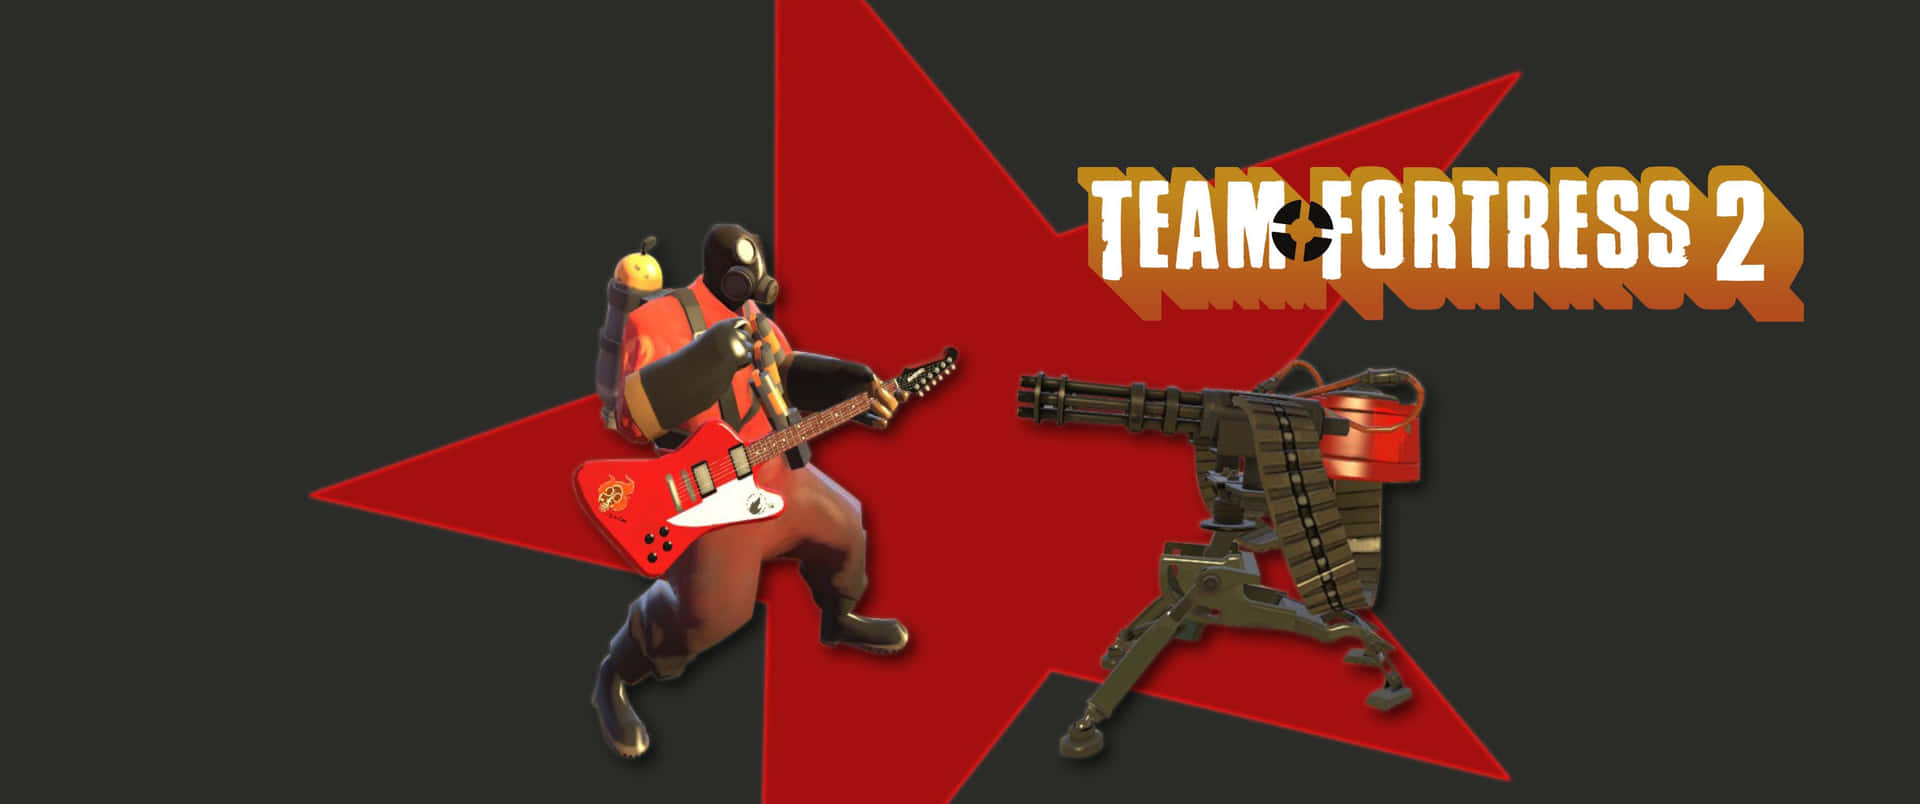 This spectacular wallpaper shows off the iconic characters of Team Fortress 2